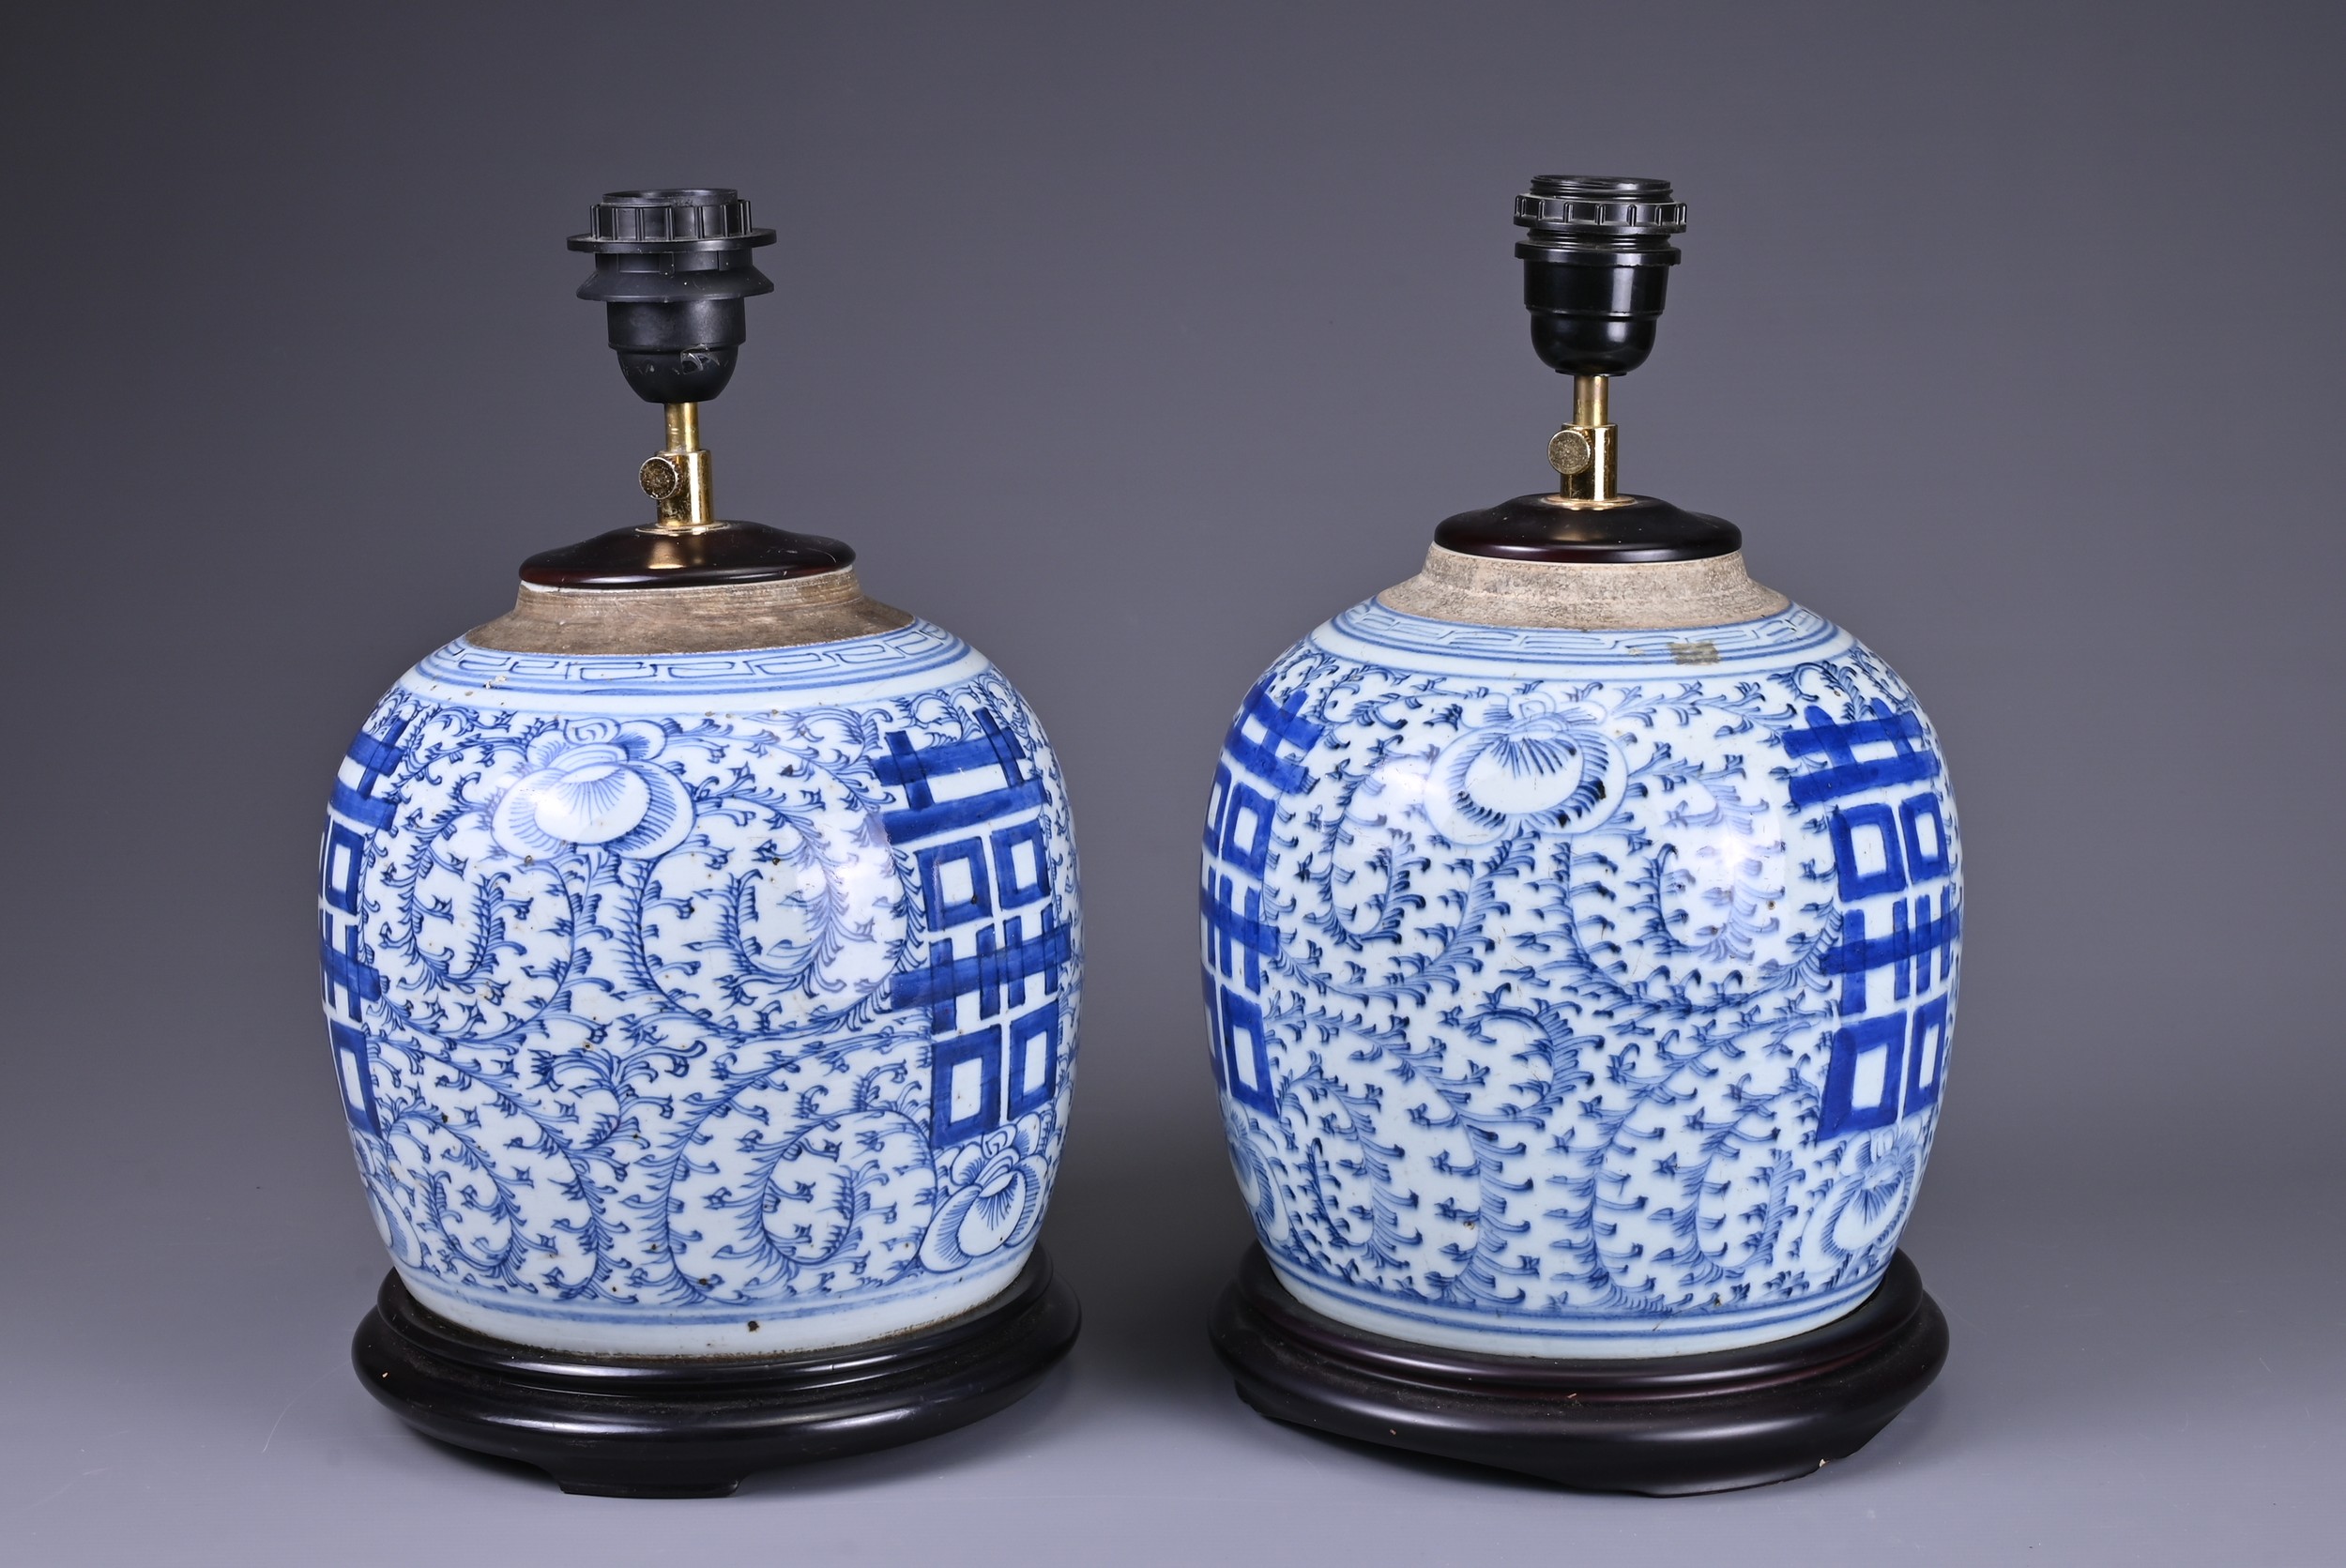 A PAIR OF 19TH CENTURY CHINESE PORCELAIN GINGER JARS MOUNTED AS LAMPS. Each decorated with scrolling - Image 2 of 5